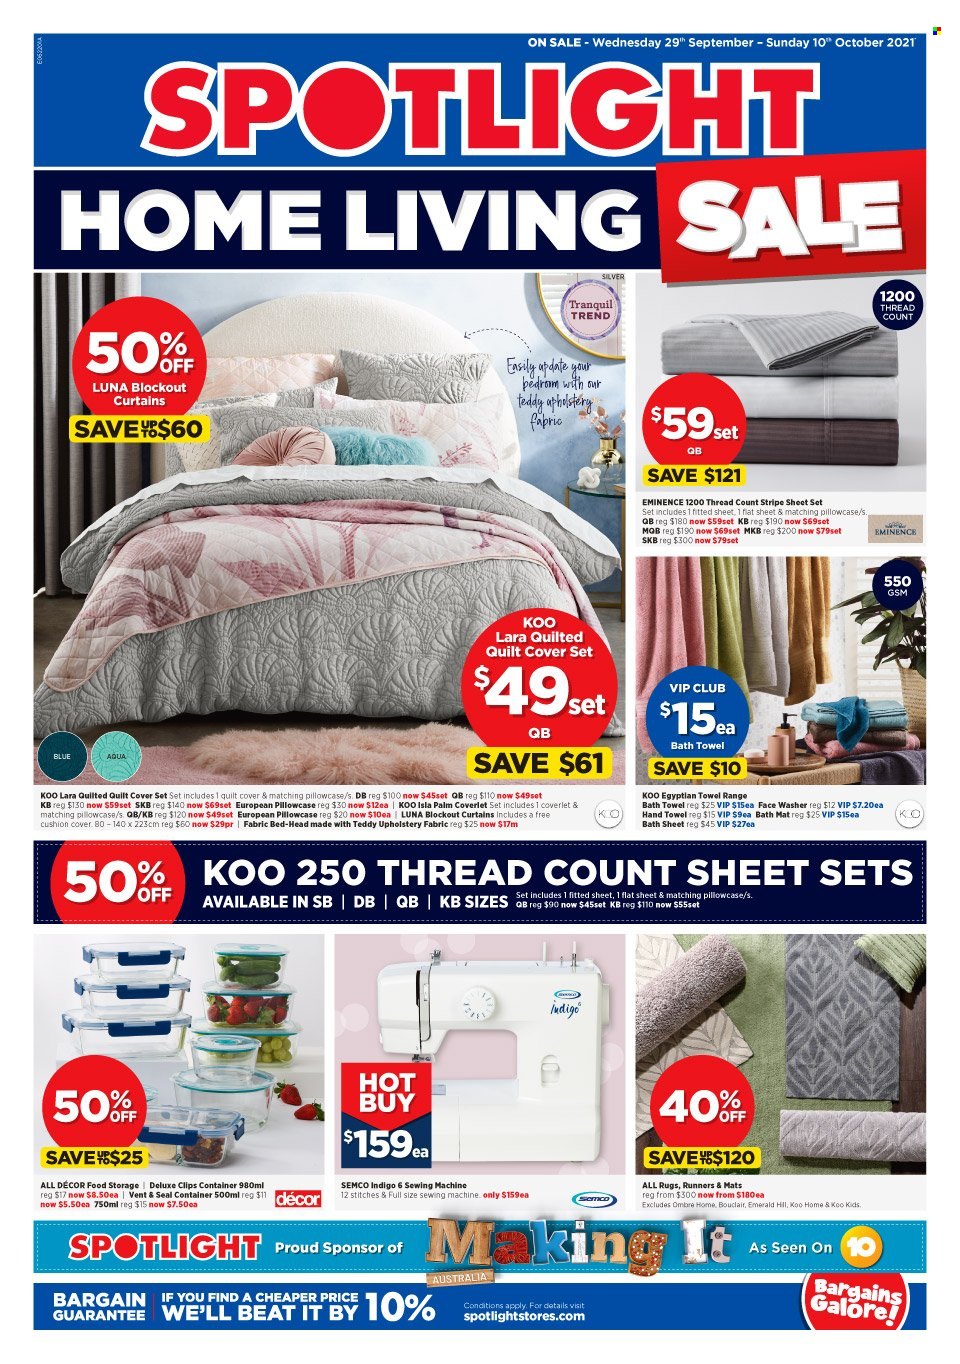 thumbnail - Spotlight Catalogue - 29 Sep 2021 - 10 Oct 2021 - Sales products - container, cushion, pillowcase, quilt, curtain, quilt cover set, bath mat, bath towel, towel, hand towel, sewing machine, teddy. Page 1.